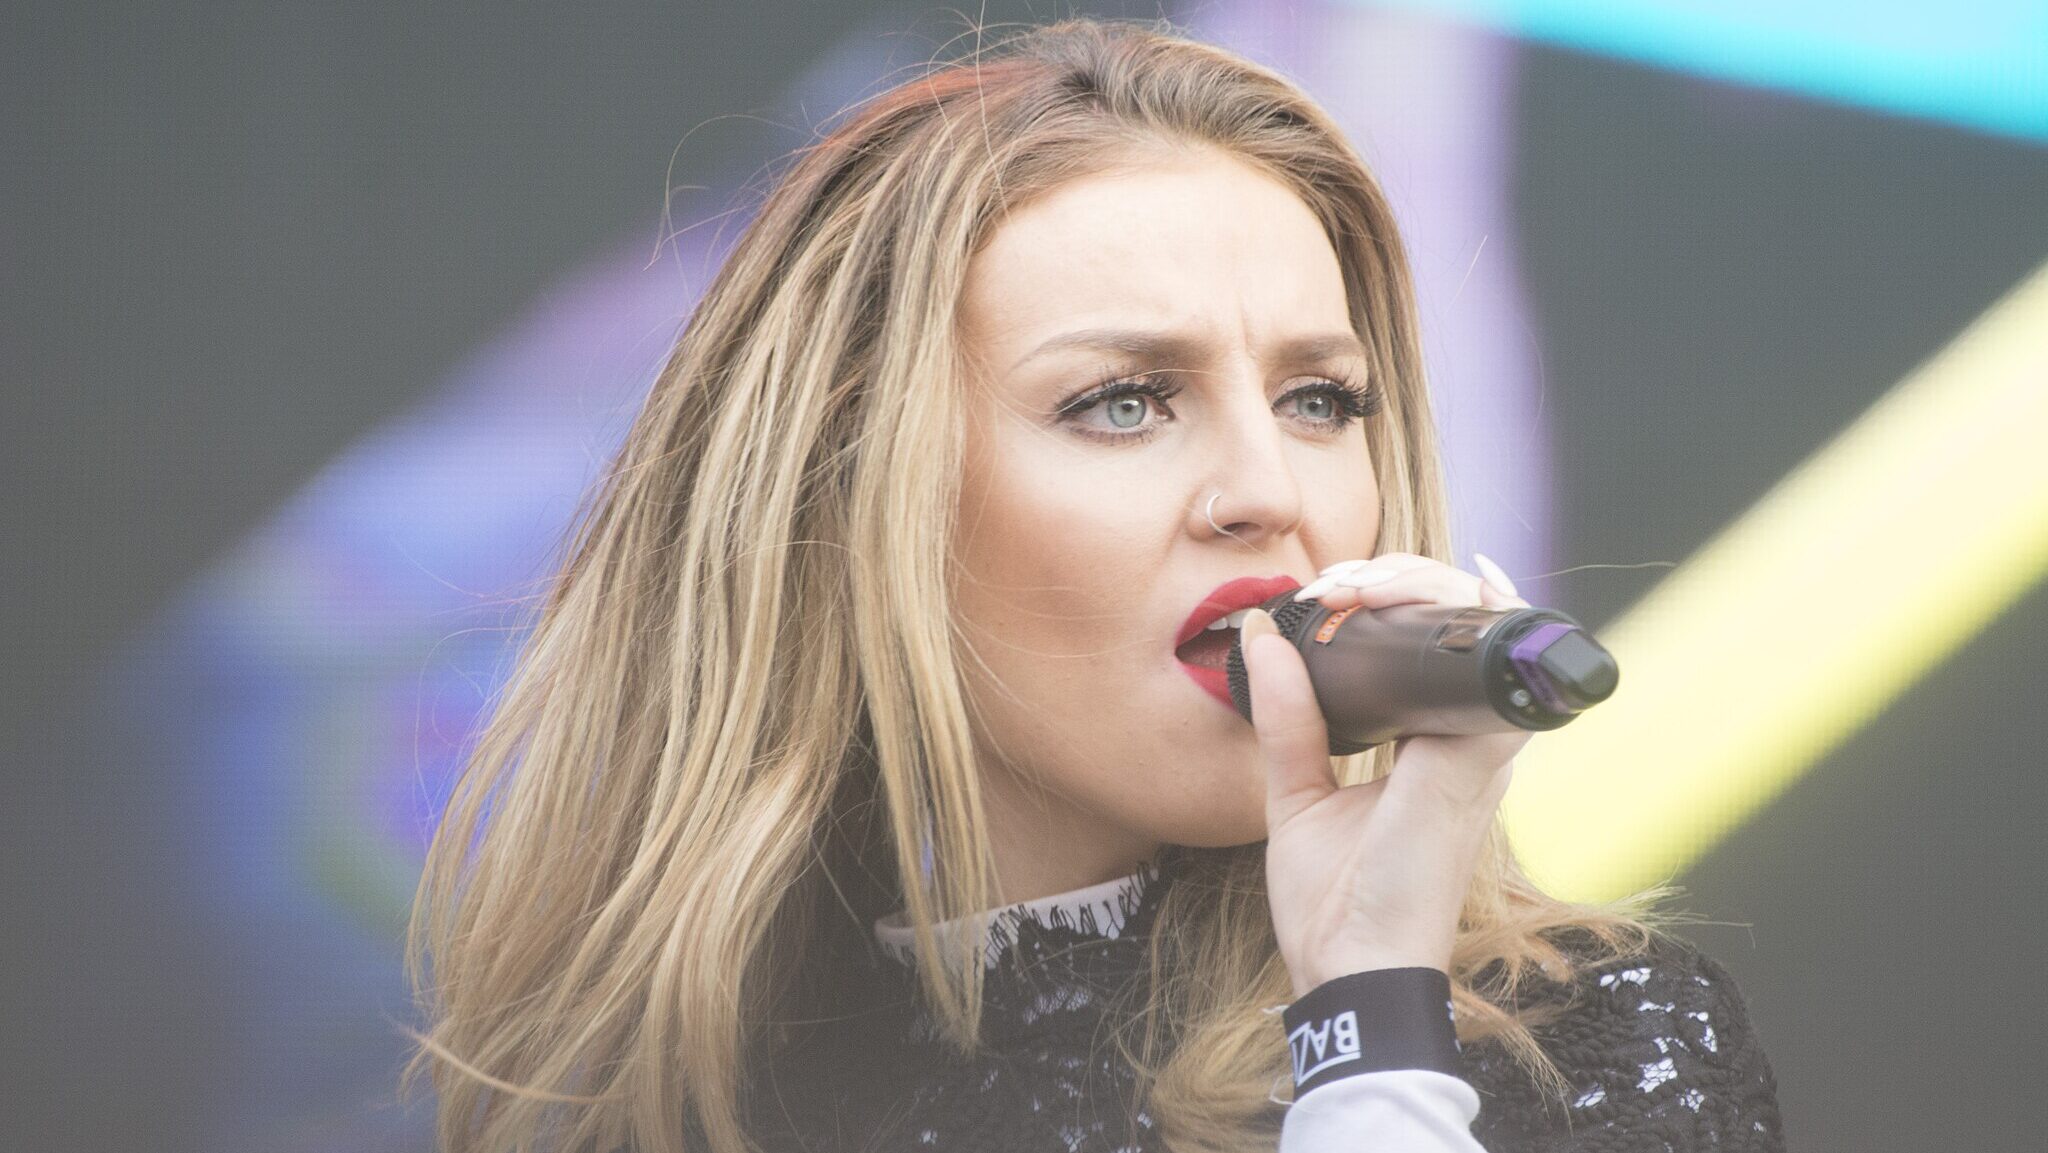 Perrie Edwards at the Gibrlatar Music Festival in 2015.